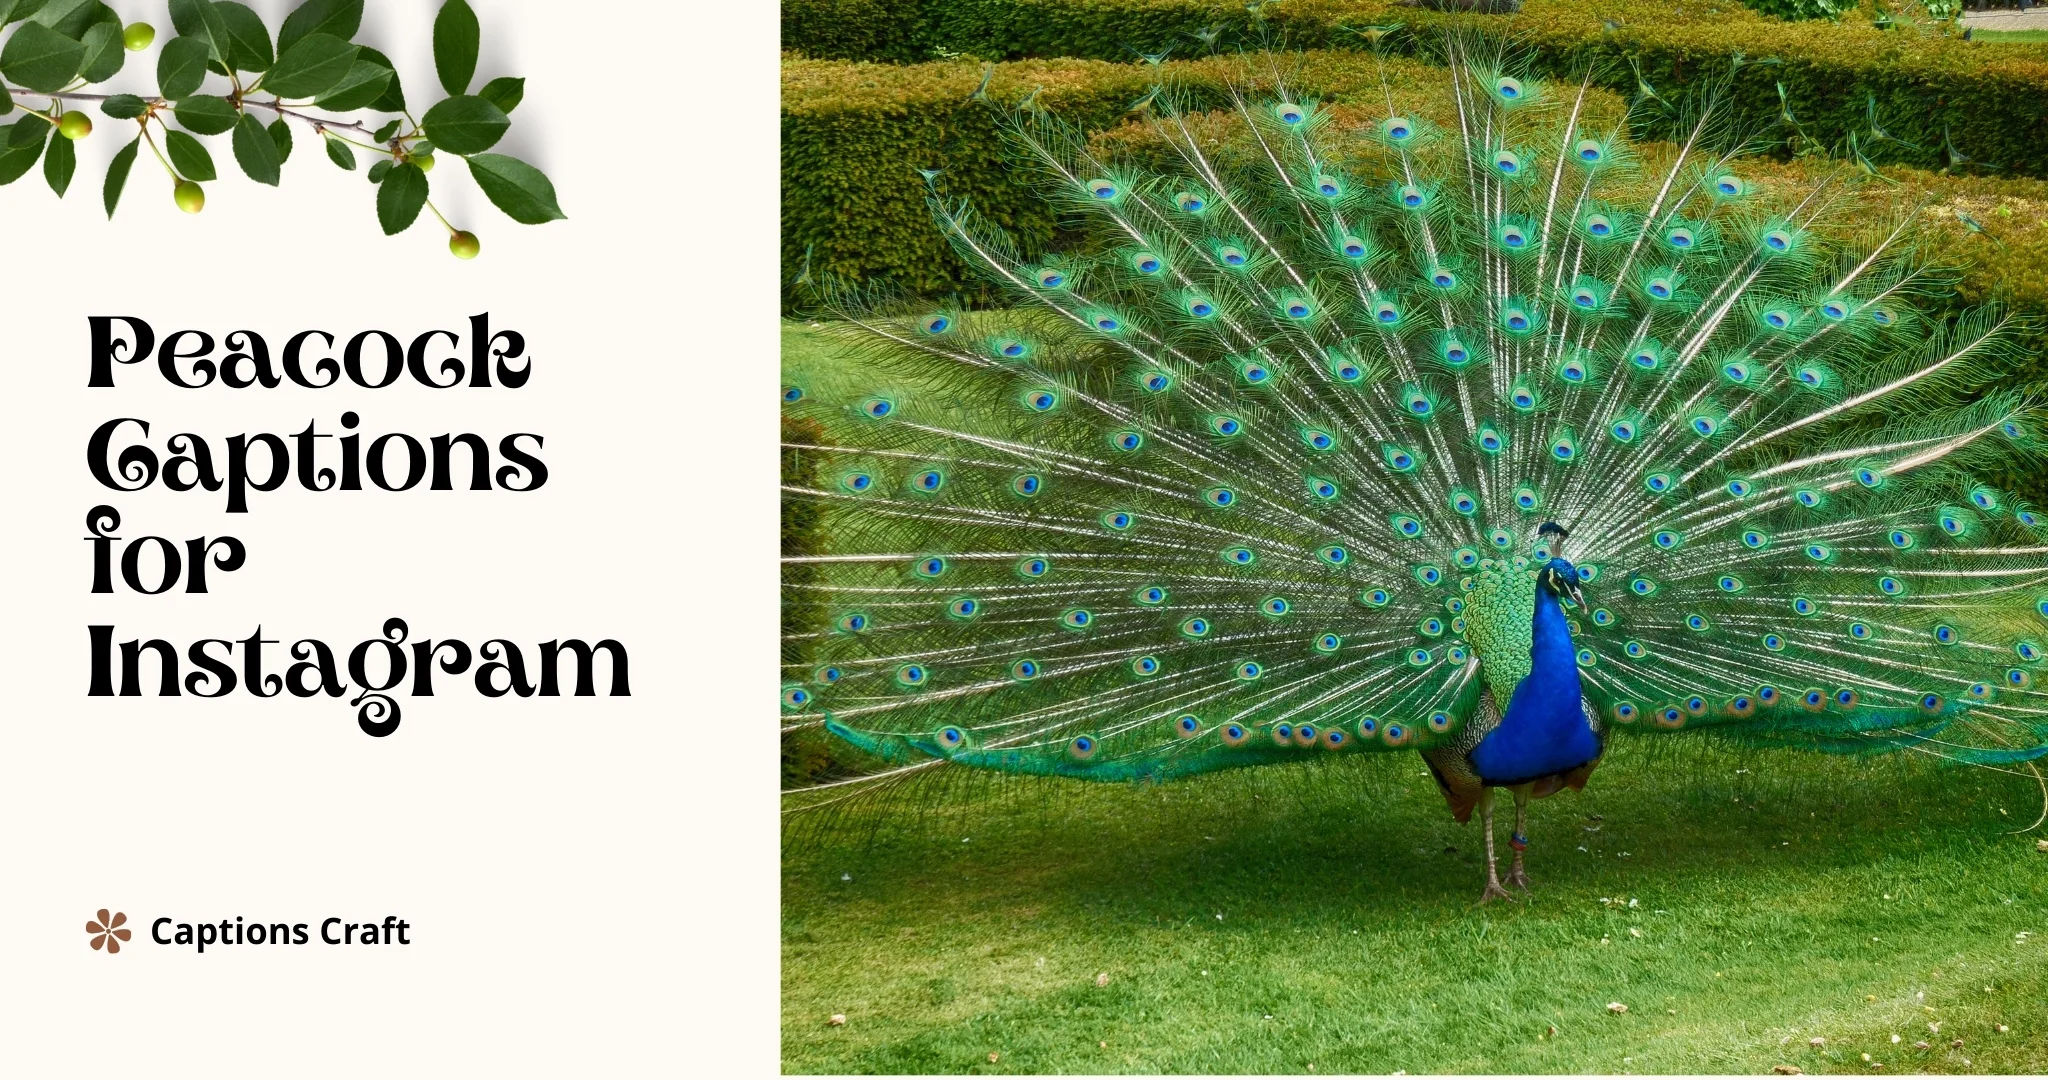 A majestic peacock perched on a captain's hat, creating a captivating image for Instagram captions.